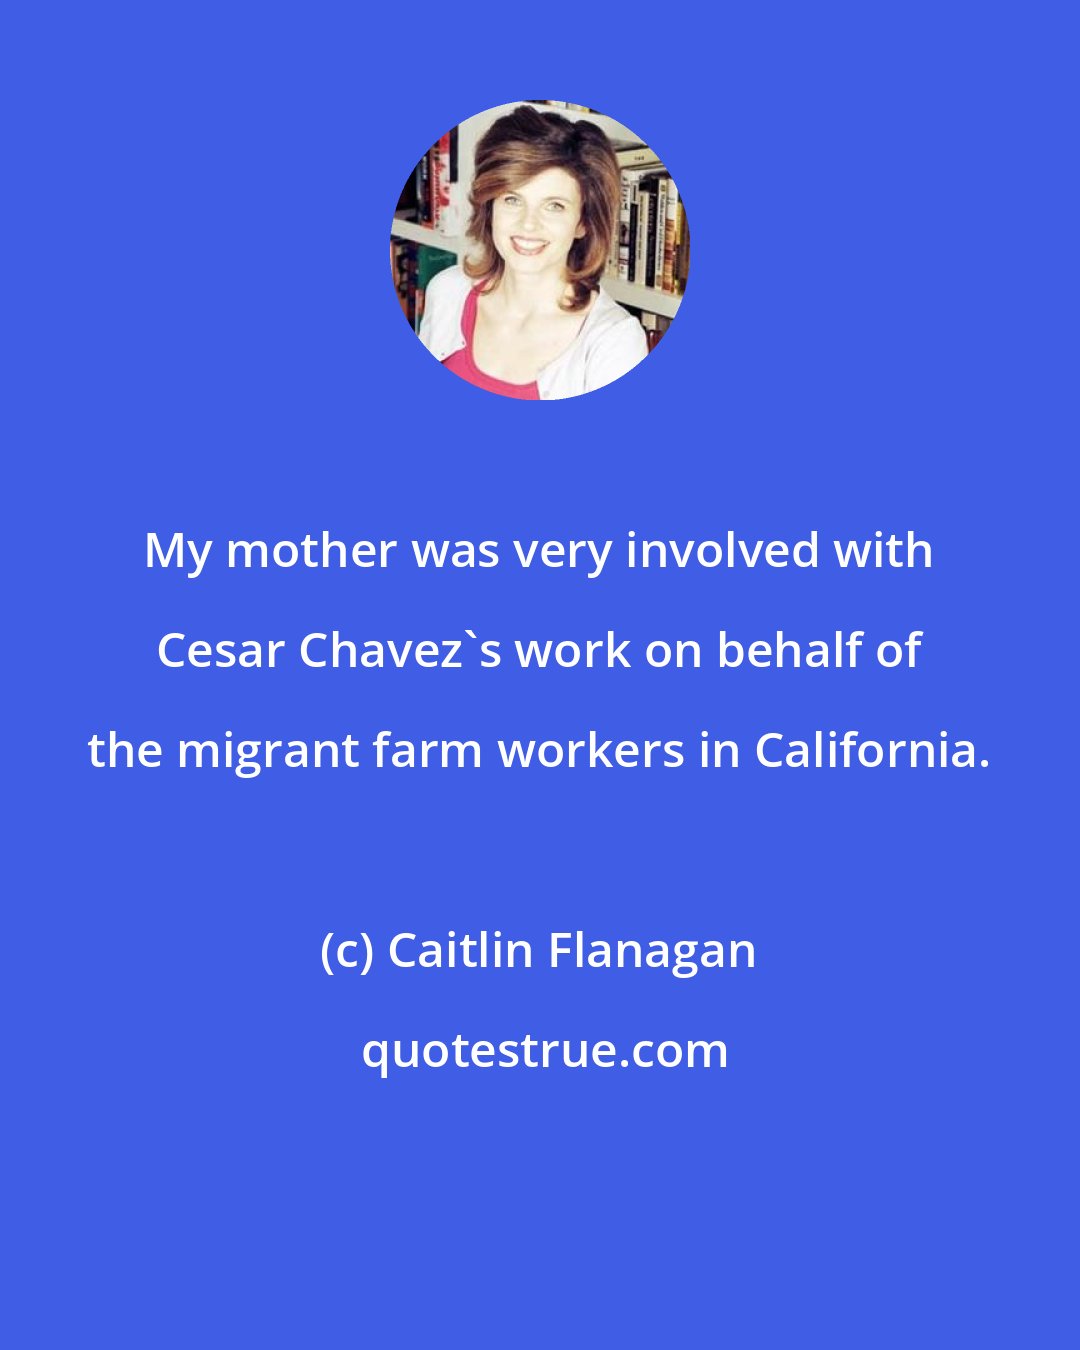 Caitlin Flanagan: My mother was very involved with Cesar Chavez's work on behalf of the migrant farm workers in California.